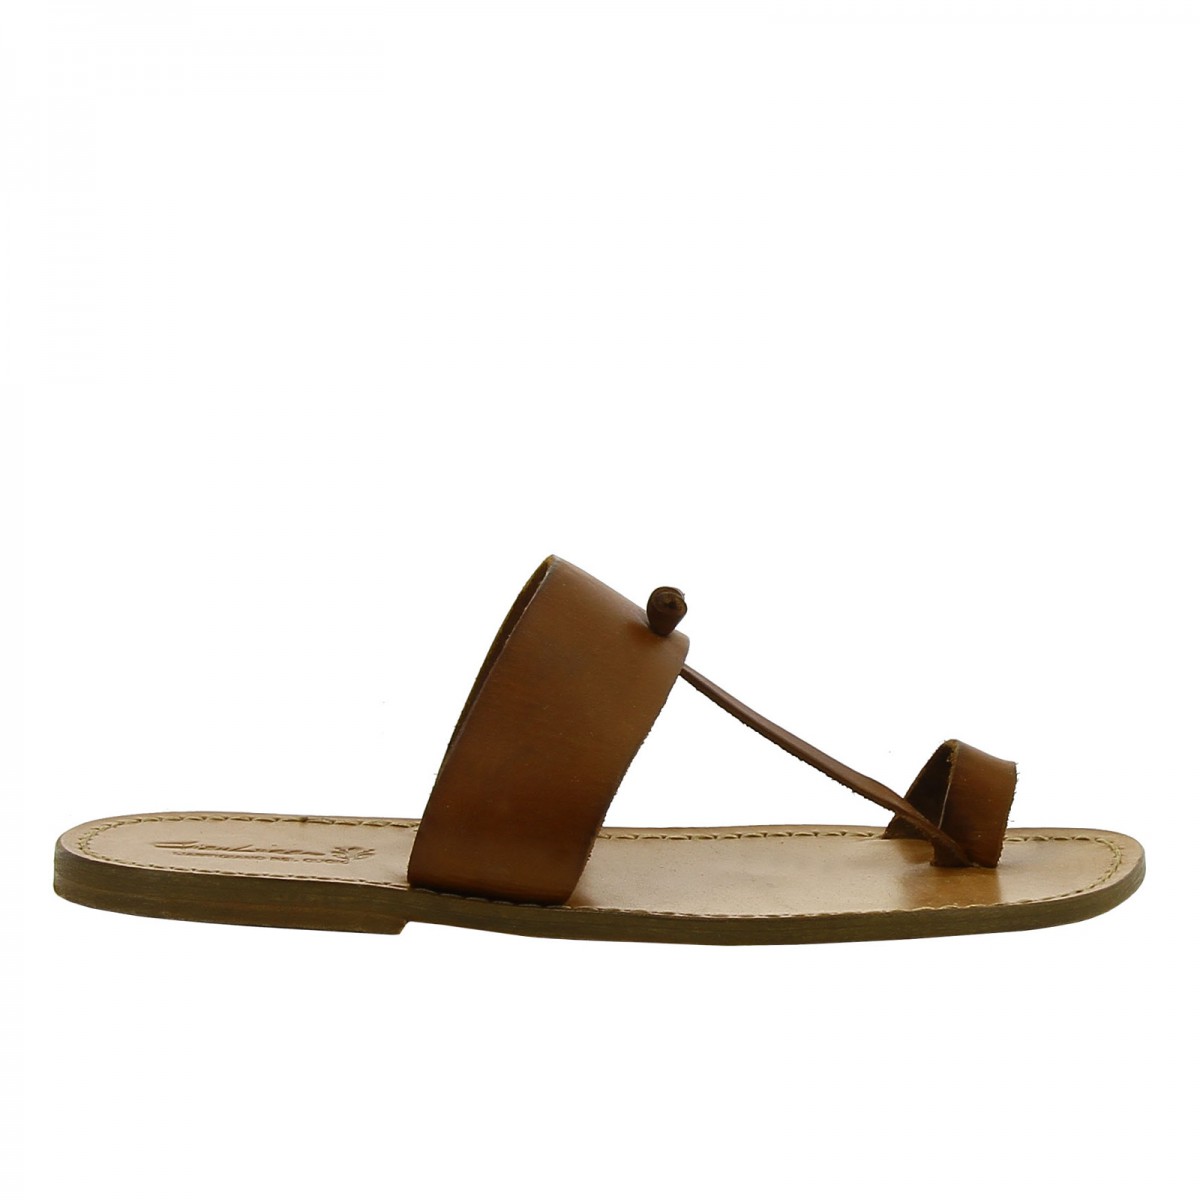 Tan leather toe loop sandals for men Handmade in Italy | The leather ...